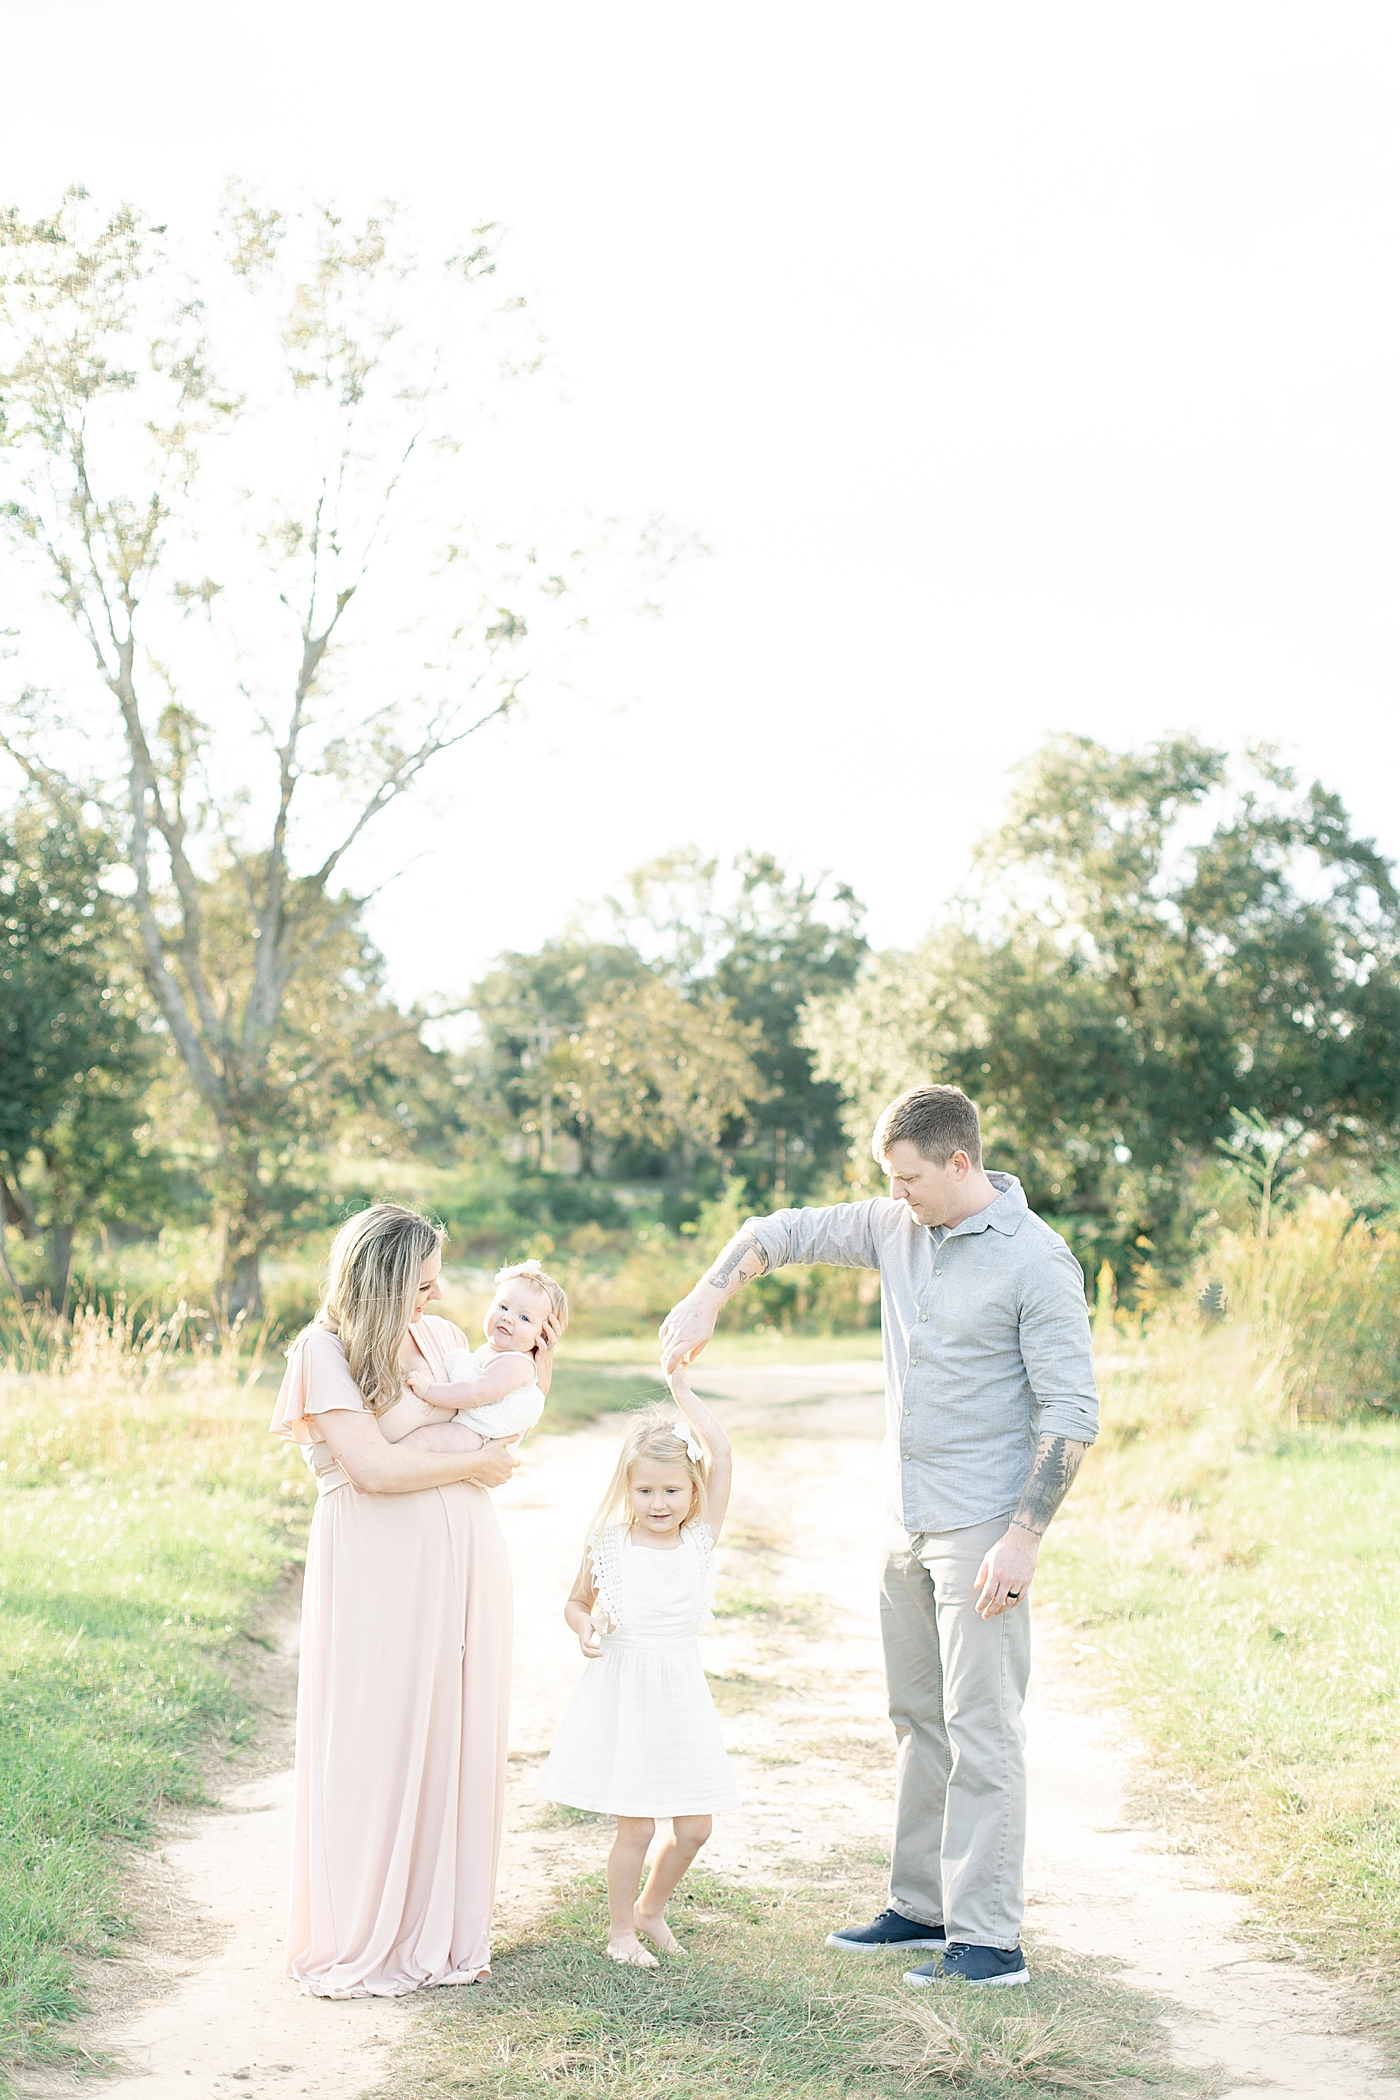 Family interacting while walking down a dirt path | Photo by Little Sunshine Photography 